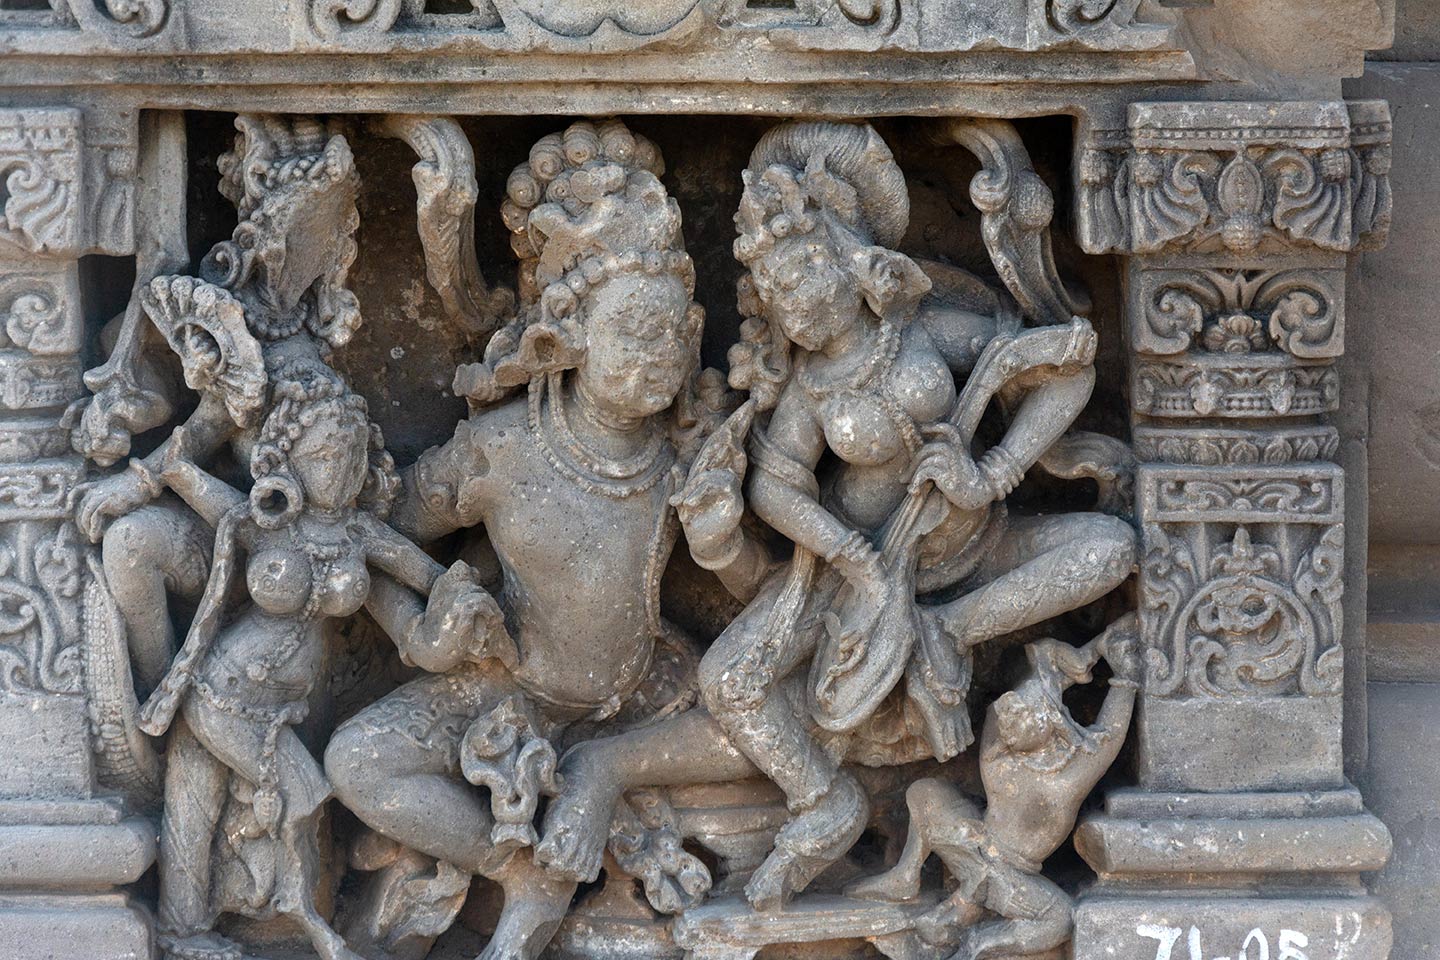 A central male figure is seated in the lalitasana pose on a raised seat, looking towards the central female figure seated on his left thigh, who is playing a stringed musical instrument. The female figure is also in the lalitasana pose and her right foot is resting on a footrest. The central male figure is forcefully pulling a female attendant (holding a hand fan) towards him with his right hand. Behind the fan-holding female is a figure (face missing) wielding a sword.